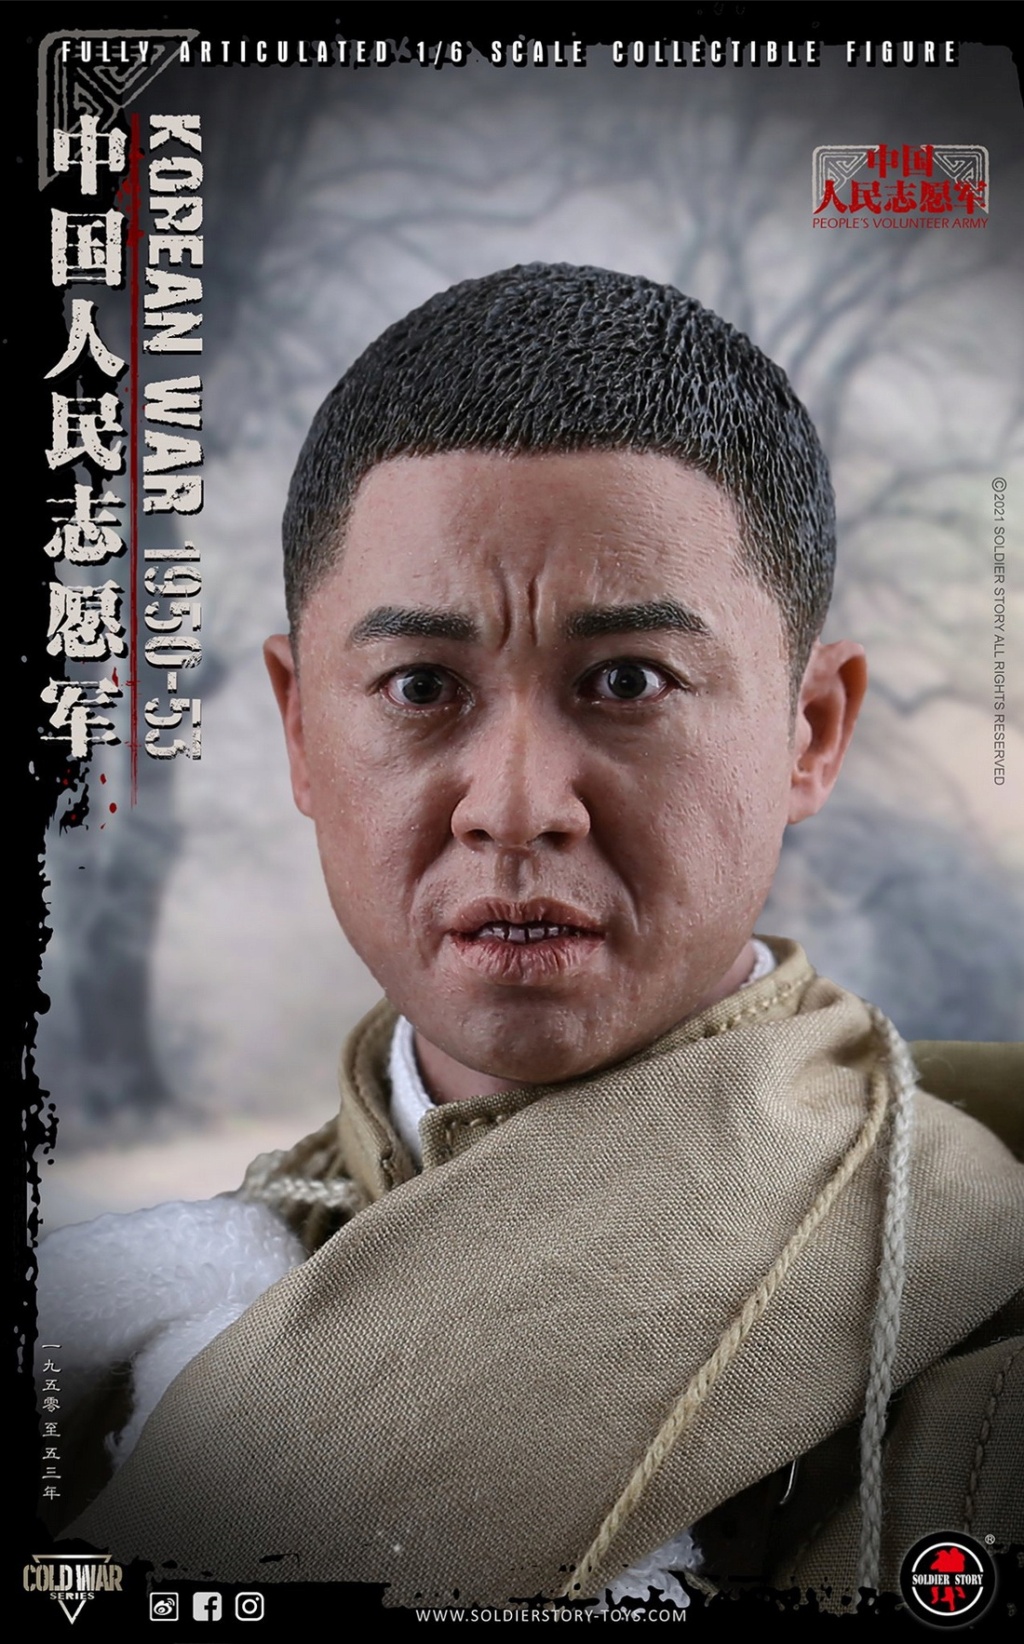 Soldierstory - NEW PRODUCT: SOLDIER STORY: 1/6 Chinese People’s Volunteers 1950-53 Collectible Action Figure (#SS-124) 9d465210